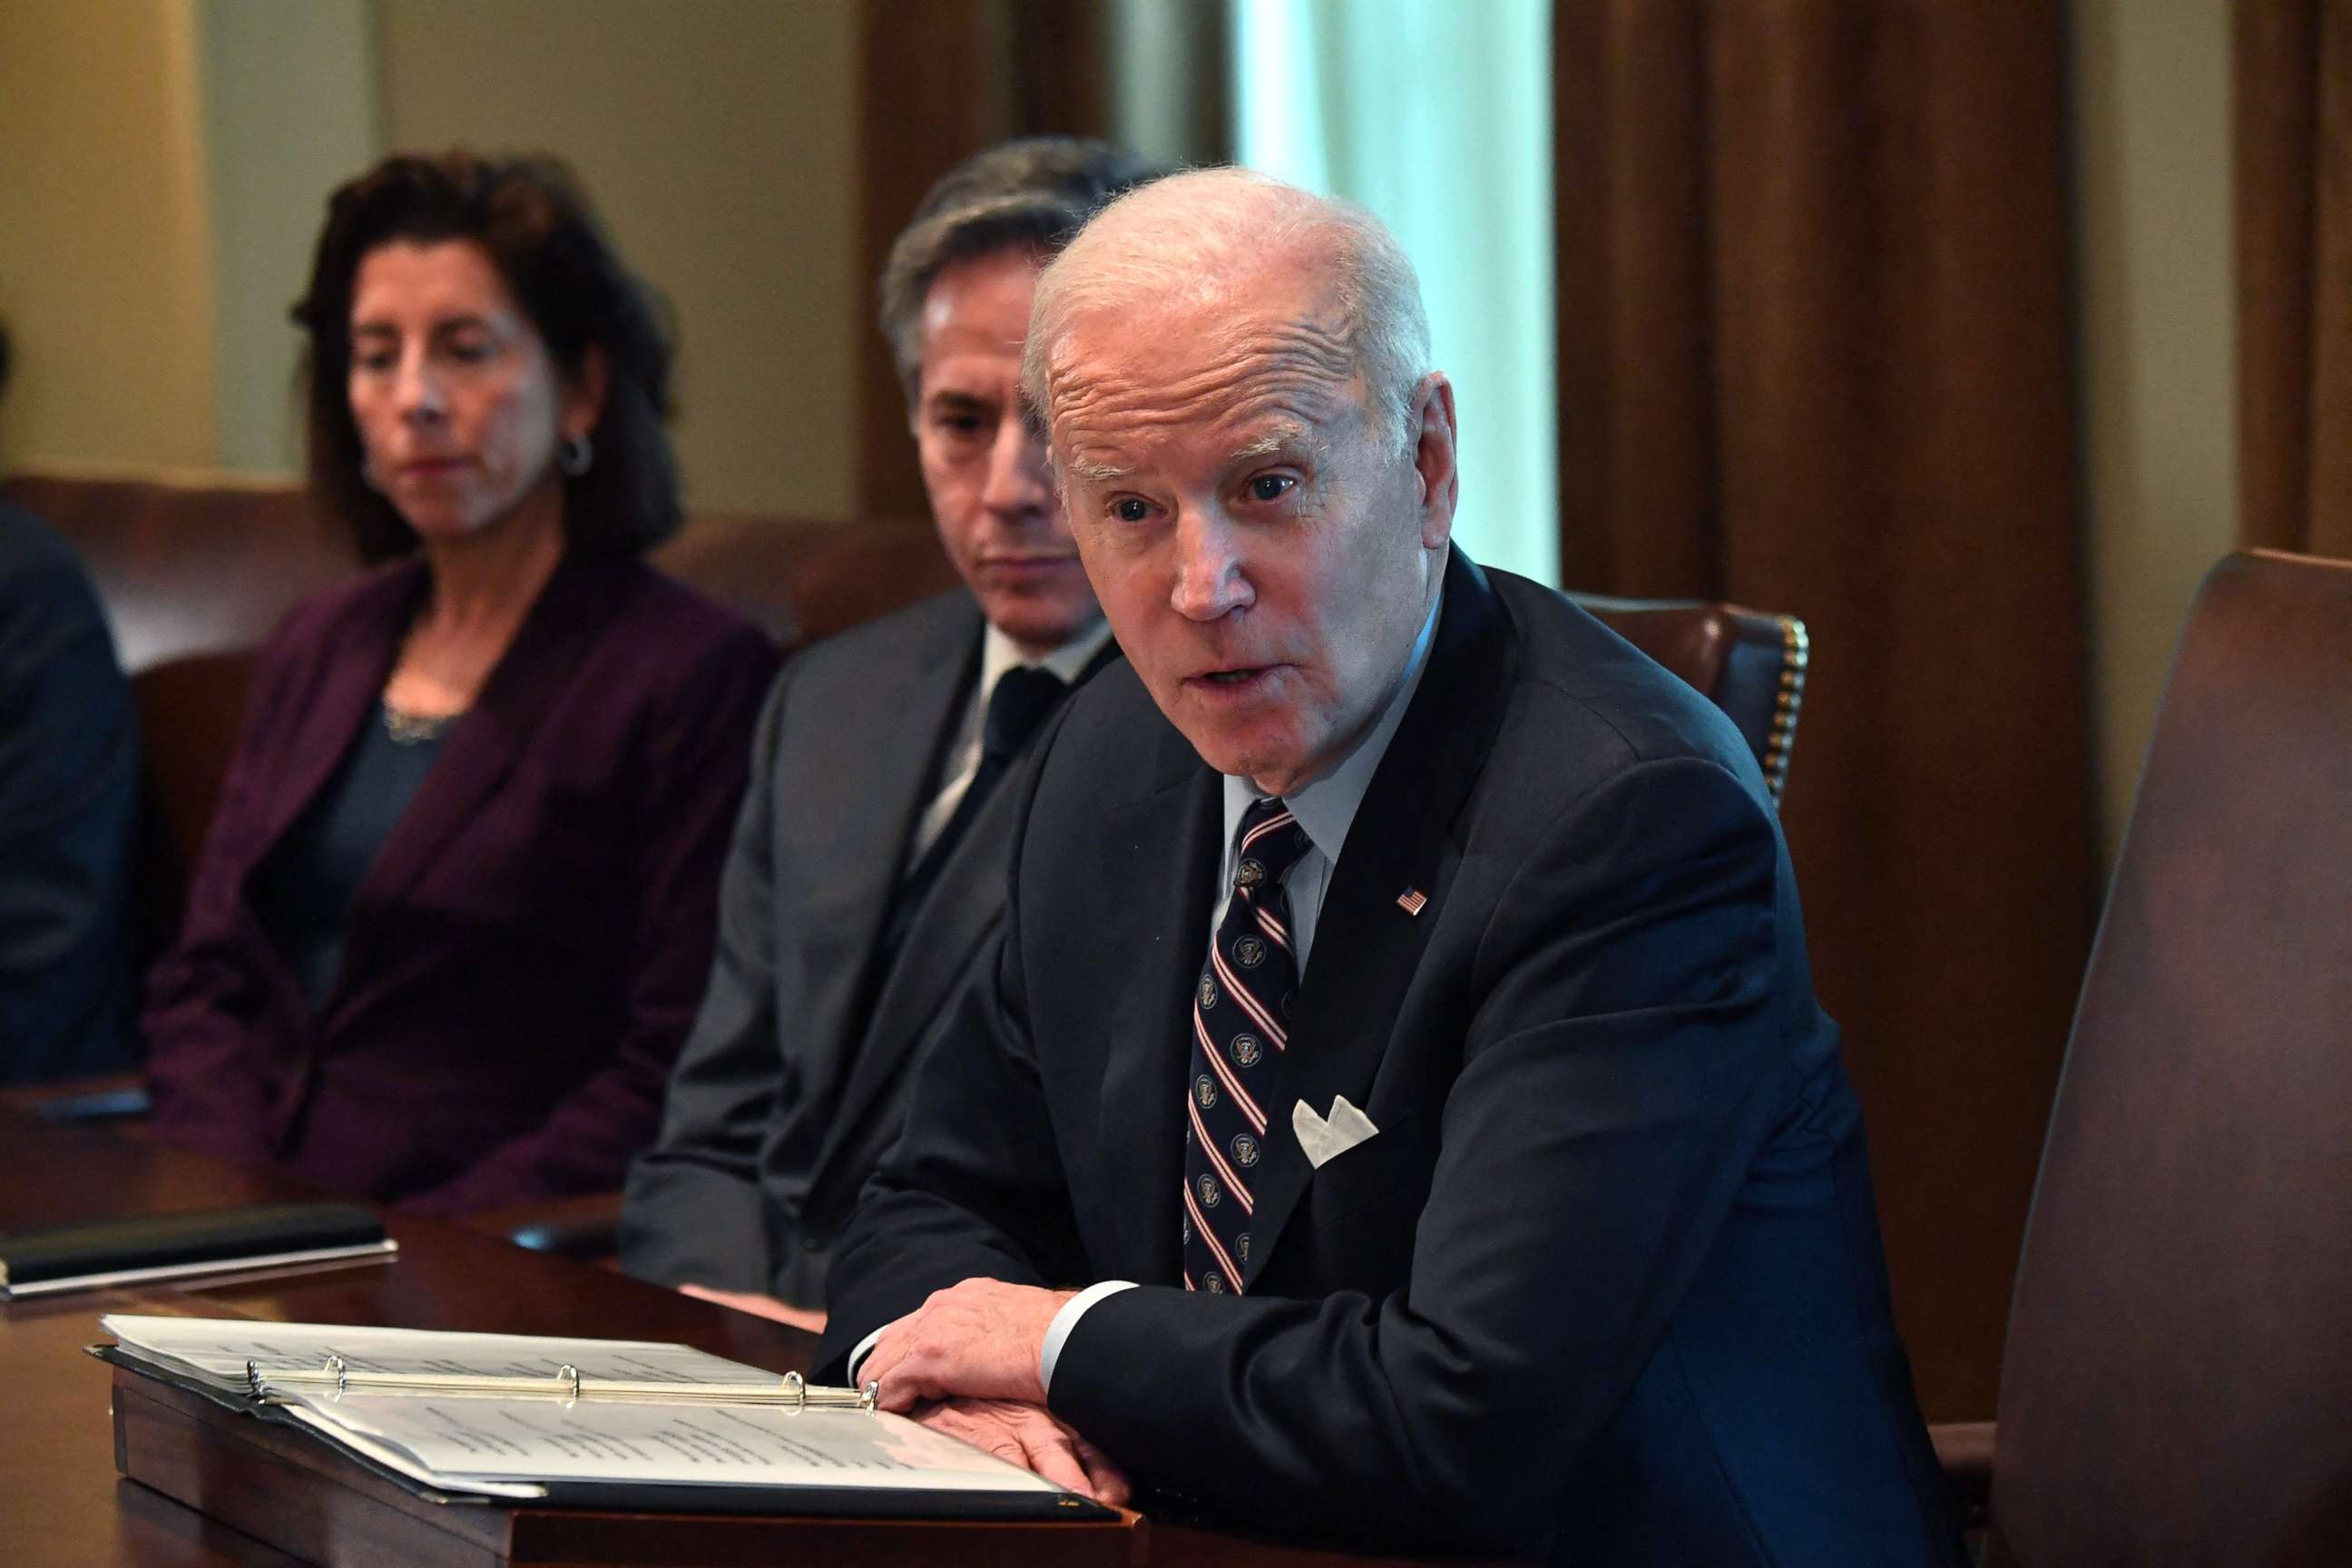 PHOTO: President Joe Biden speaks during a meeting in the Cabinet Room of the White House in Washington, D.C.